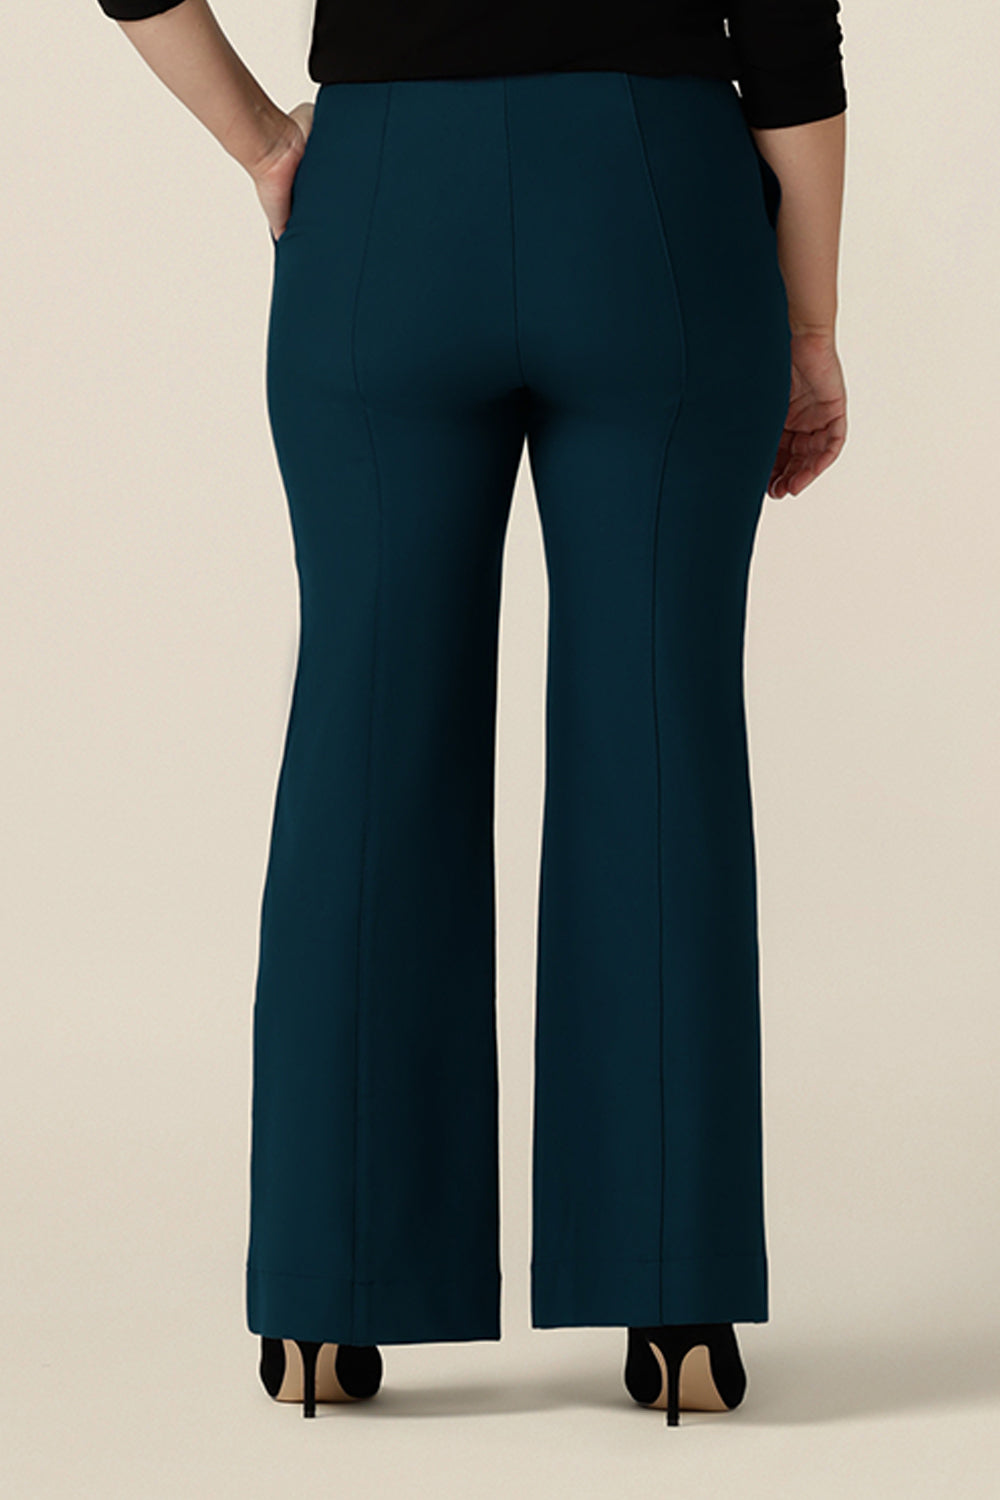 Back view of petrol blue, tailored bootcut pants, size 10. Made in Australia in ponte fabric, these comfortable work pants are great for curvy women - shop in sizes 8 to 24.